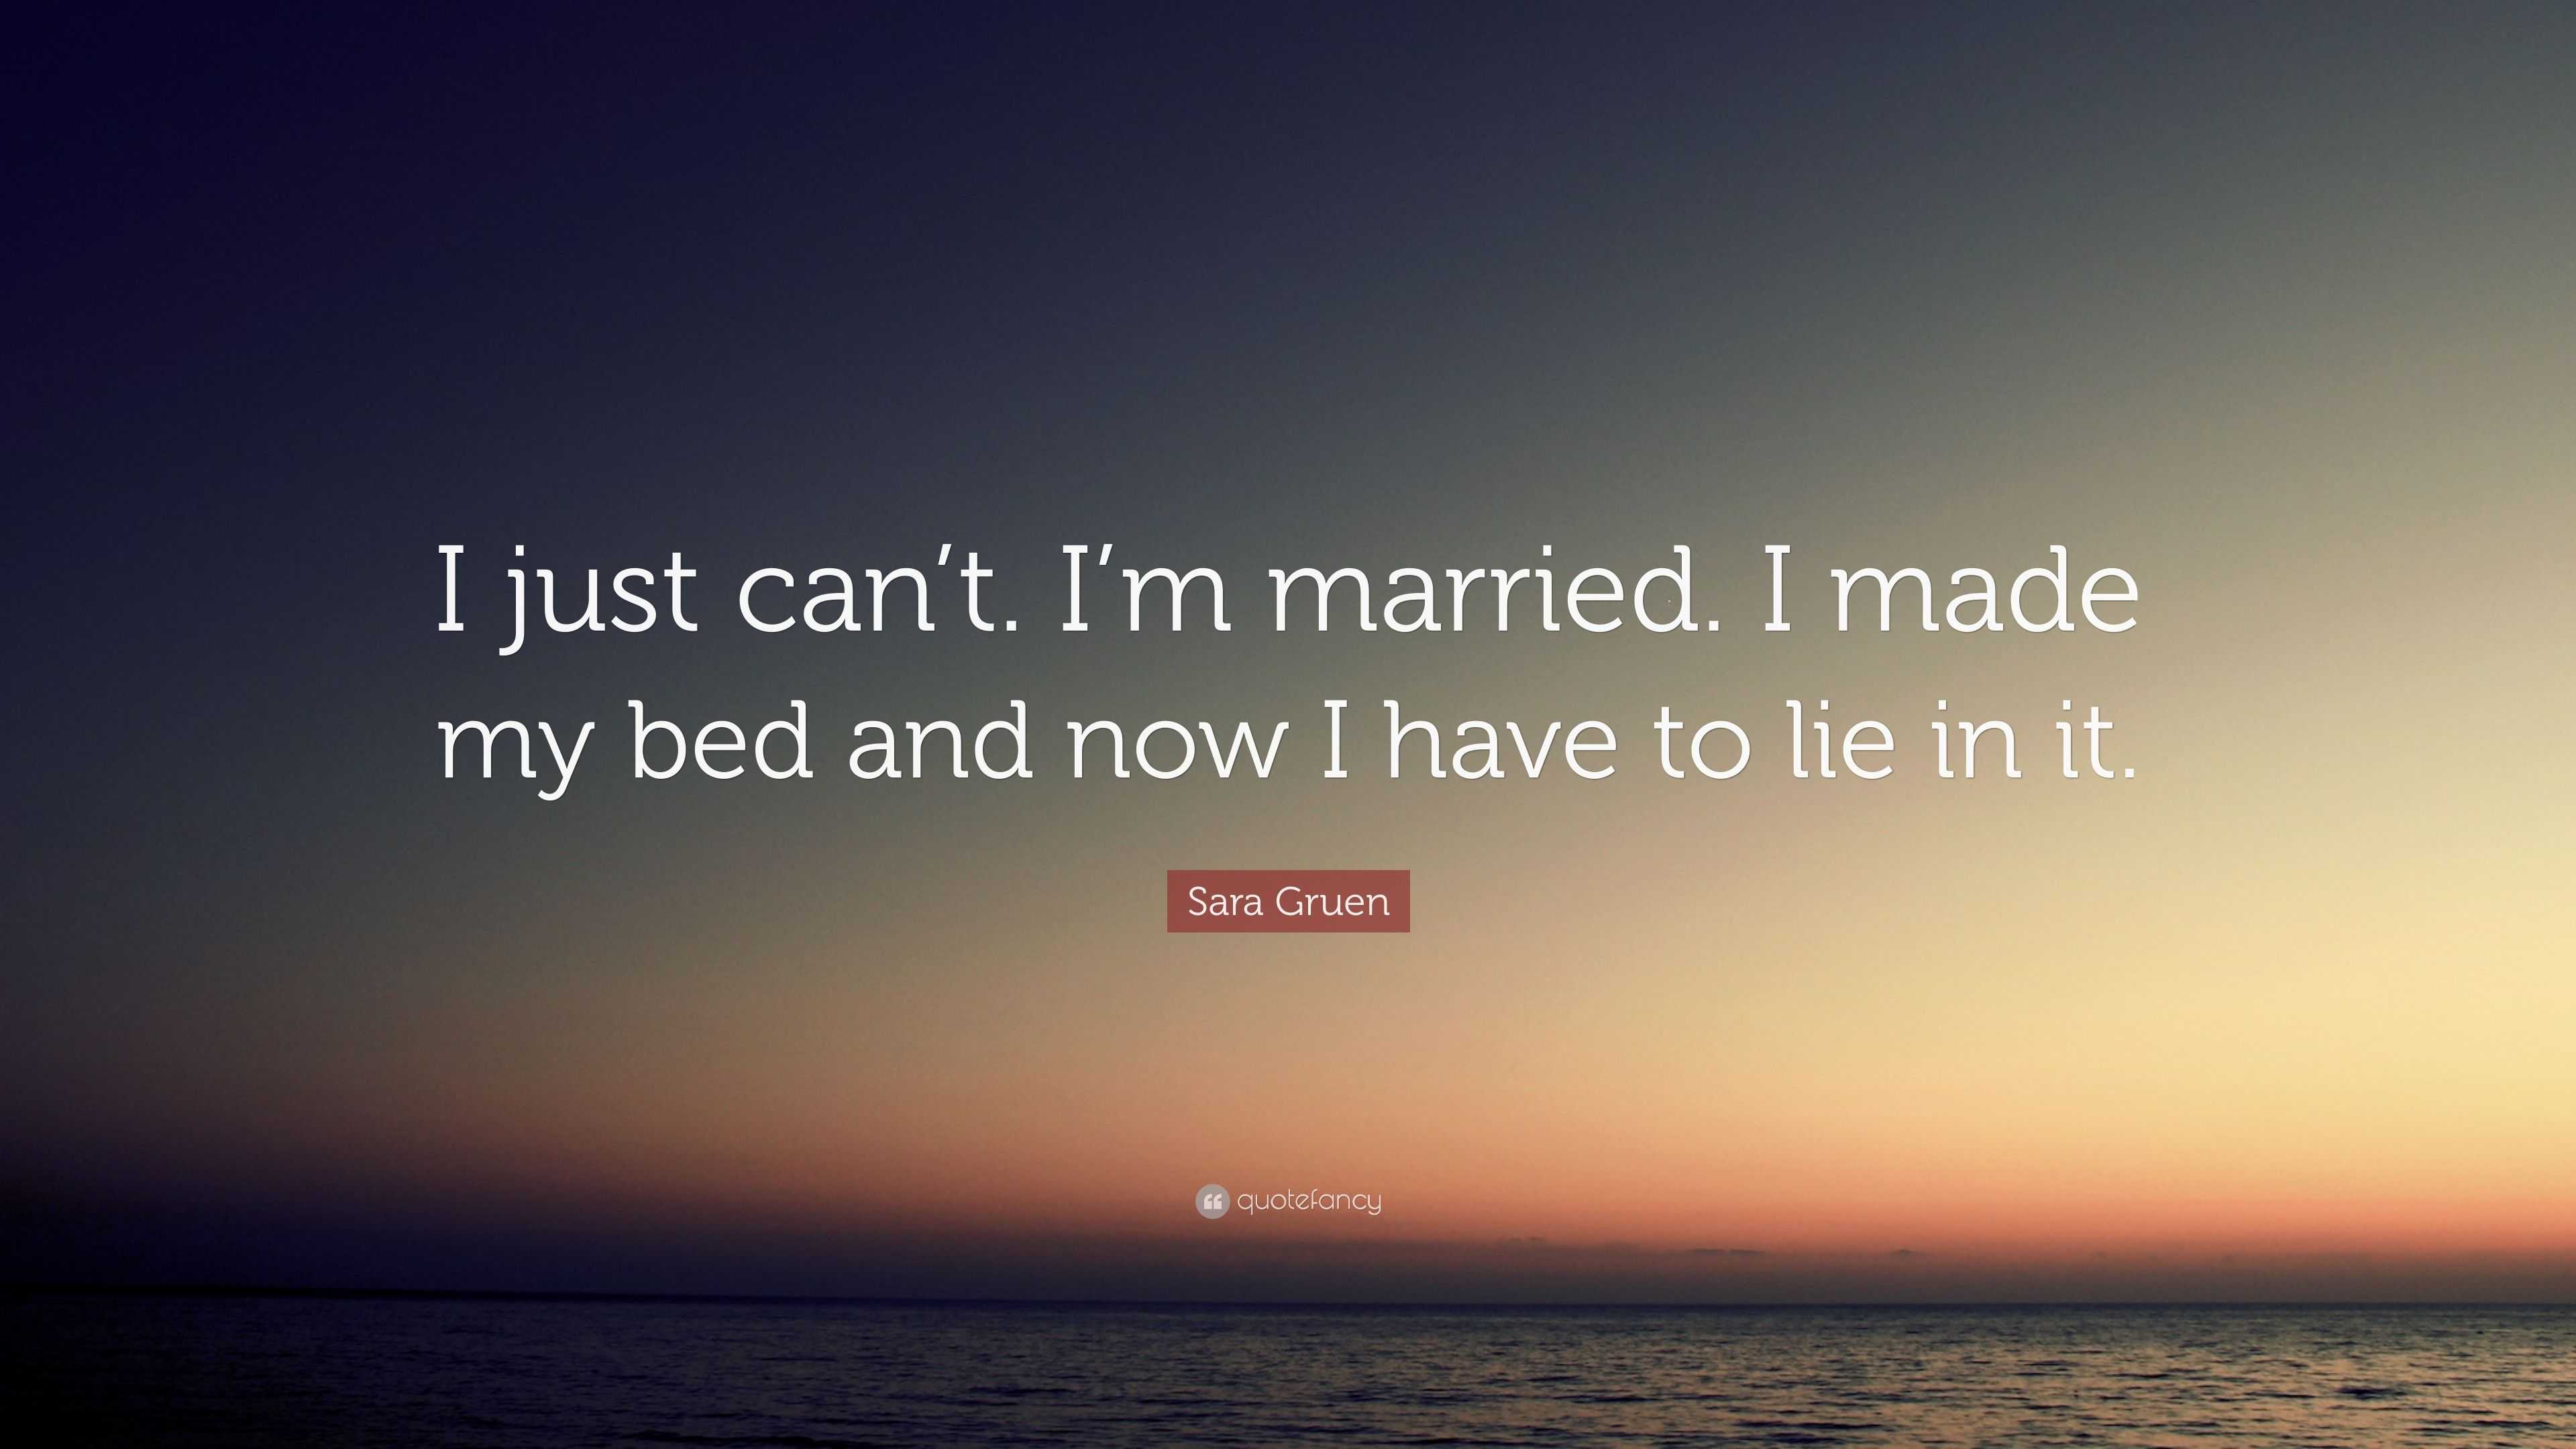 Sara Gruen Quote: “I just can’t. I’m married. I made my bed and now I ...